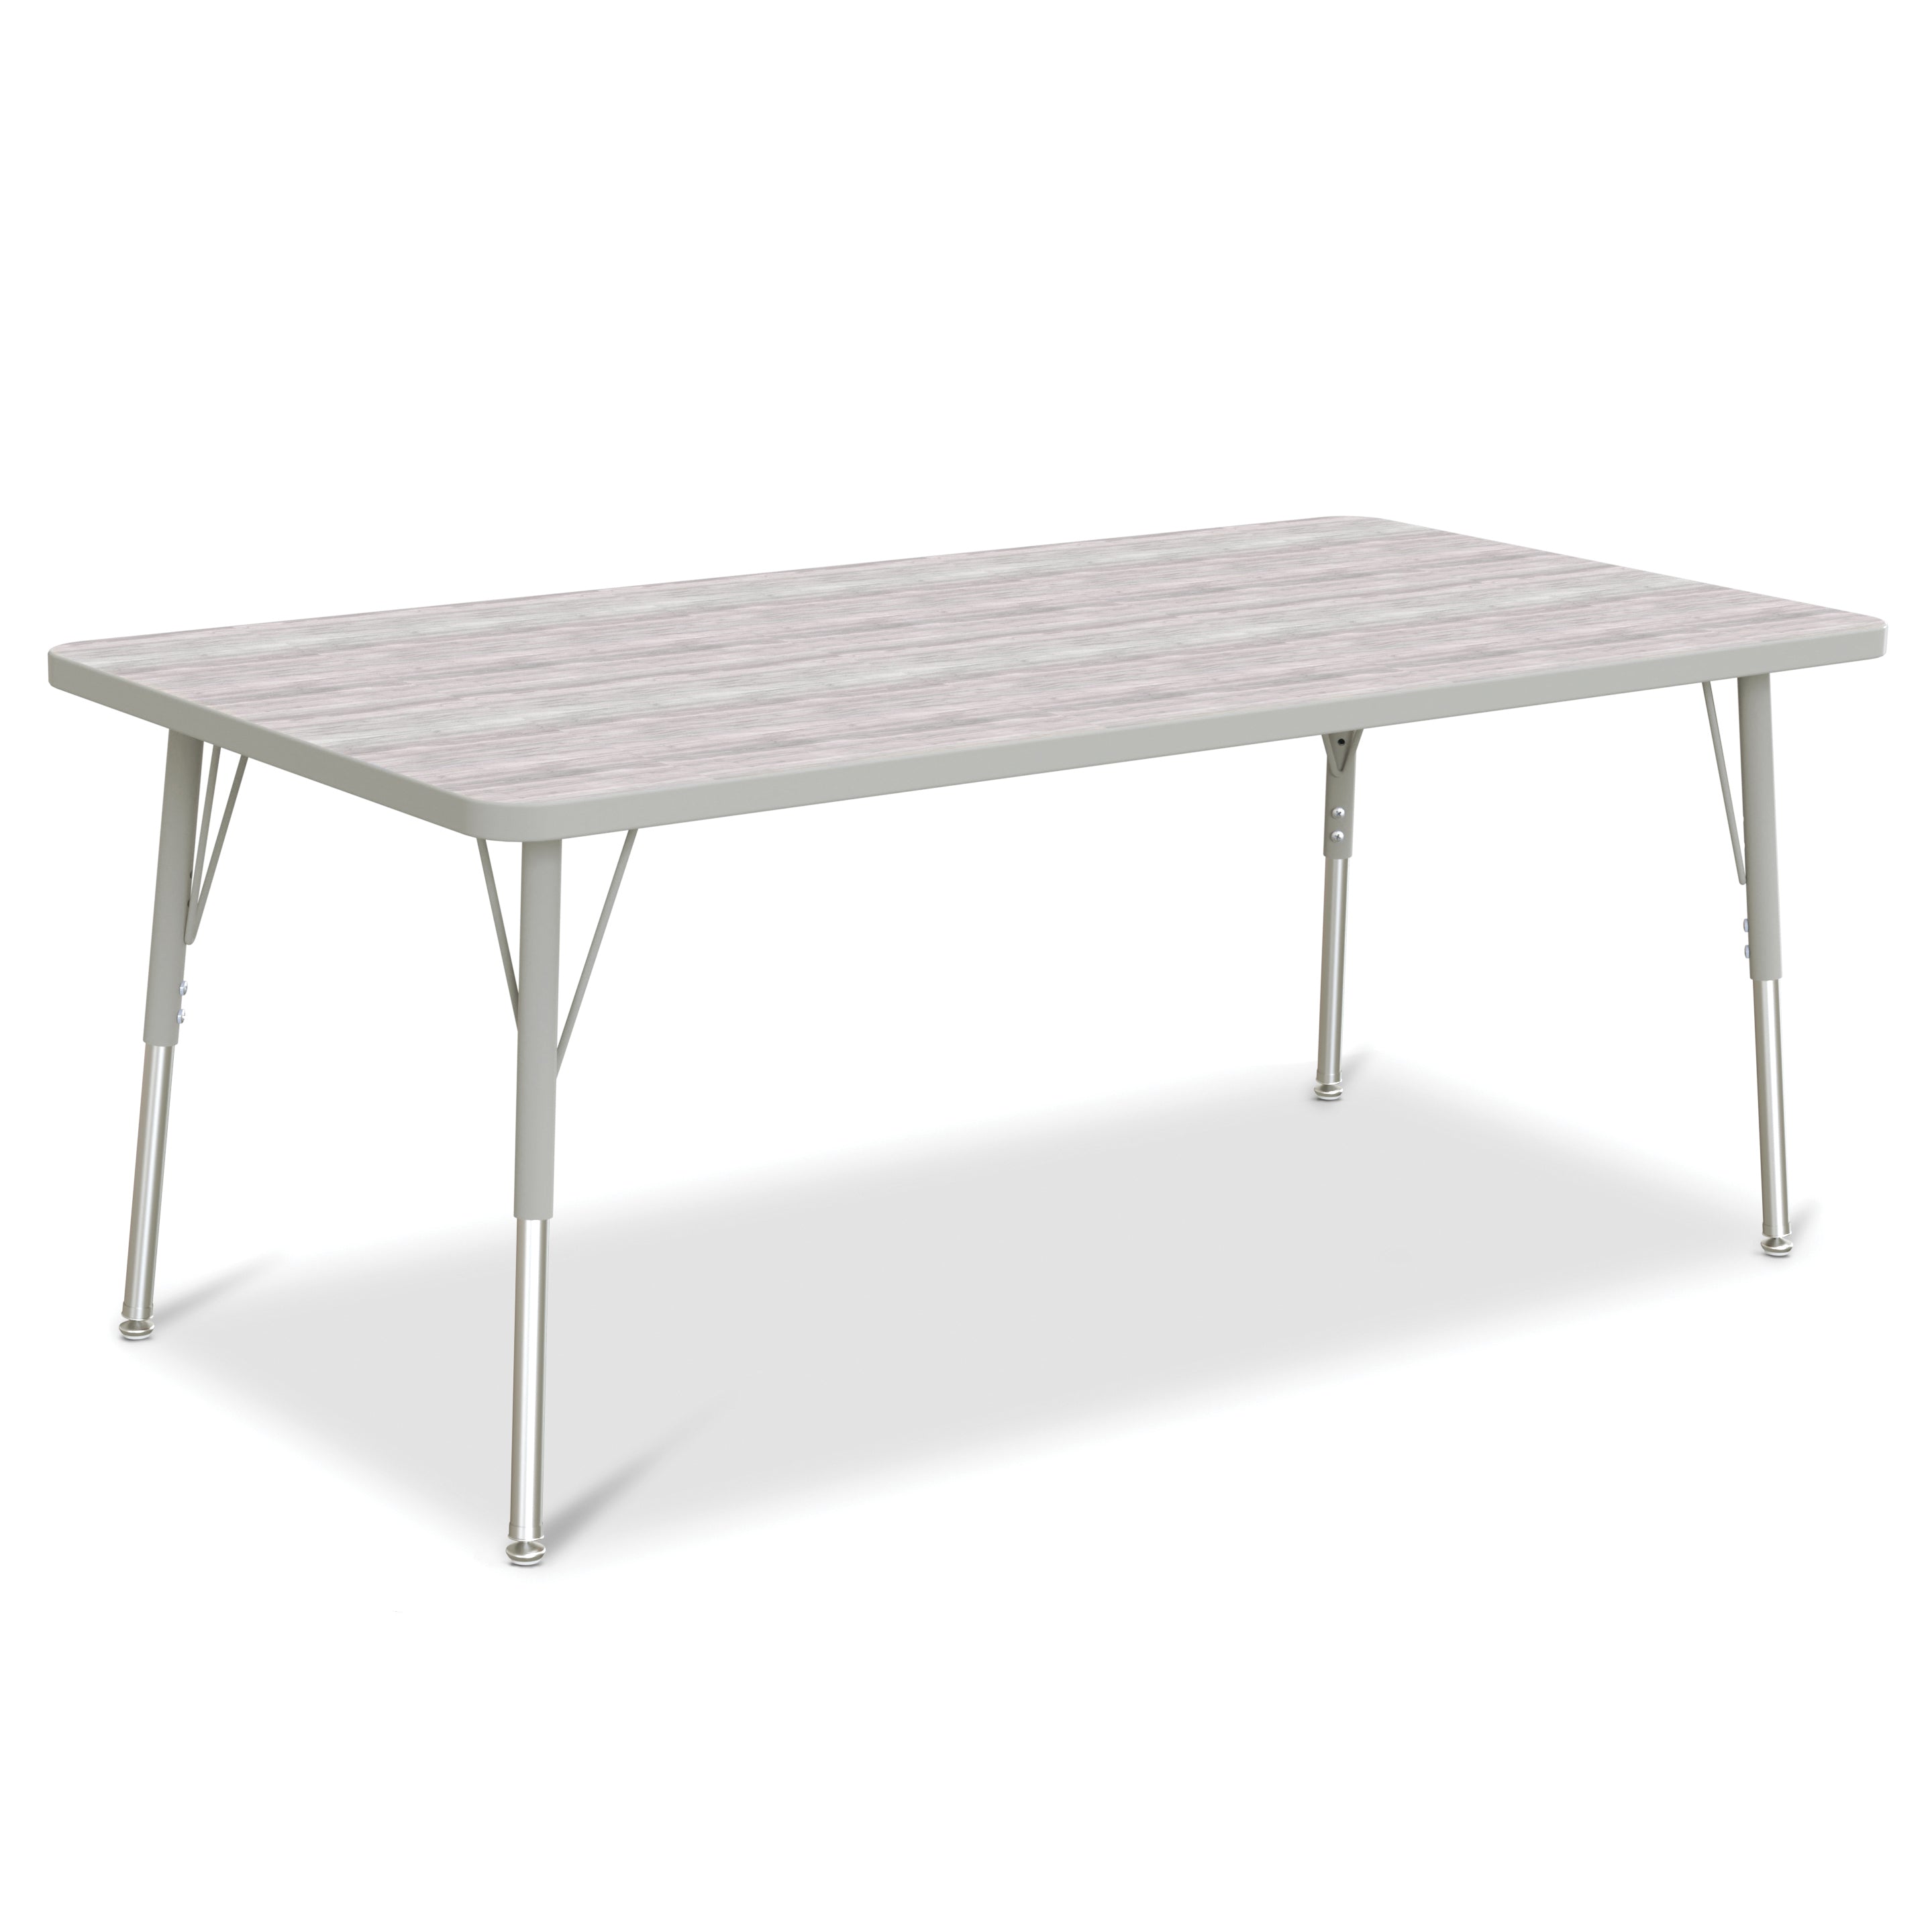 6408JCA450, Berries Rectangle Activity Table - 30" X 60", A-height - Driftwood Gray/Gray/Gray